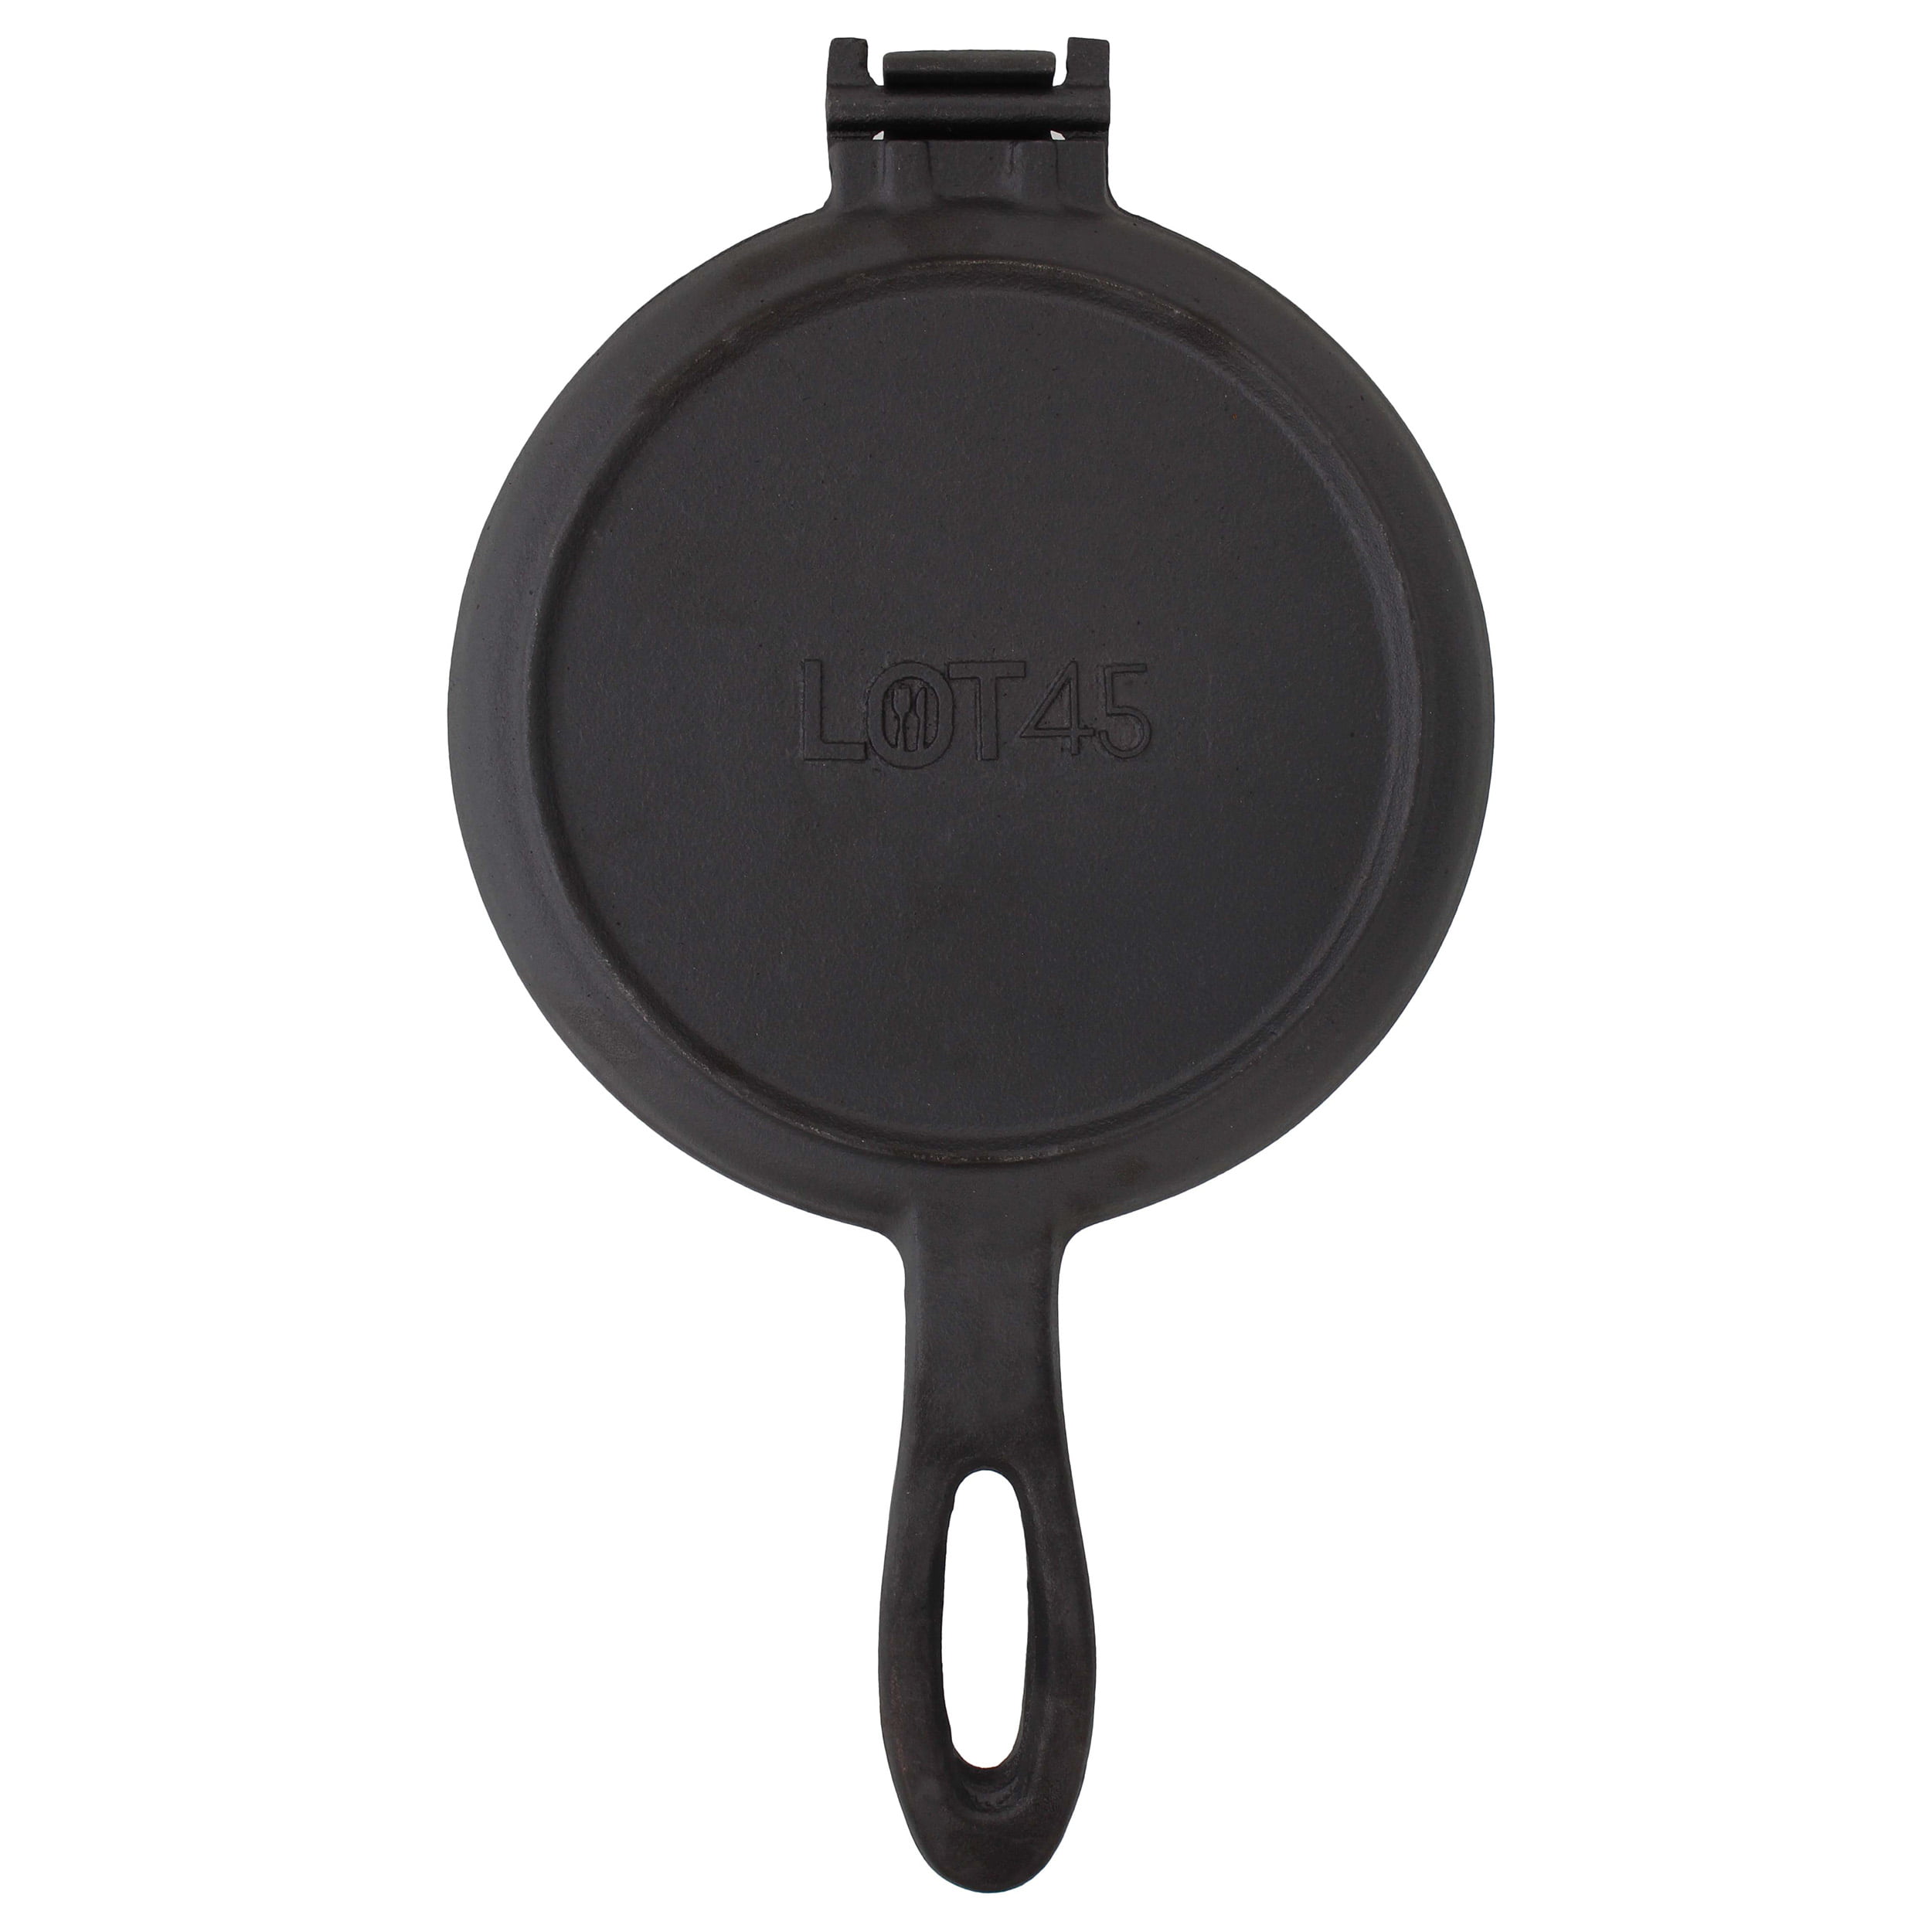 Lot45 Cast Iron Skillet with Silicone Handle Cover - 10in Cookware Frying  Pan